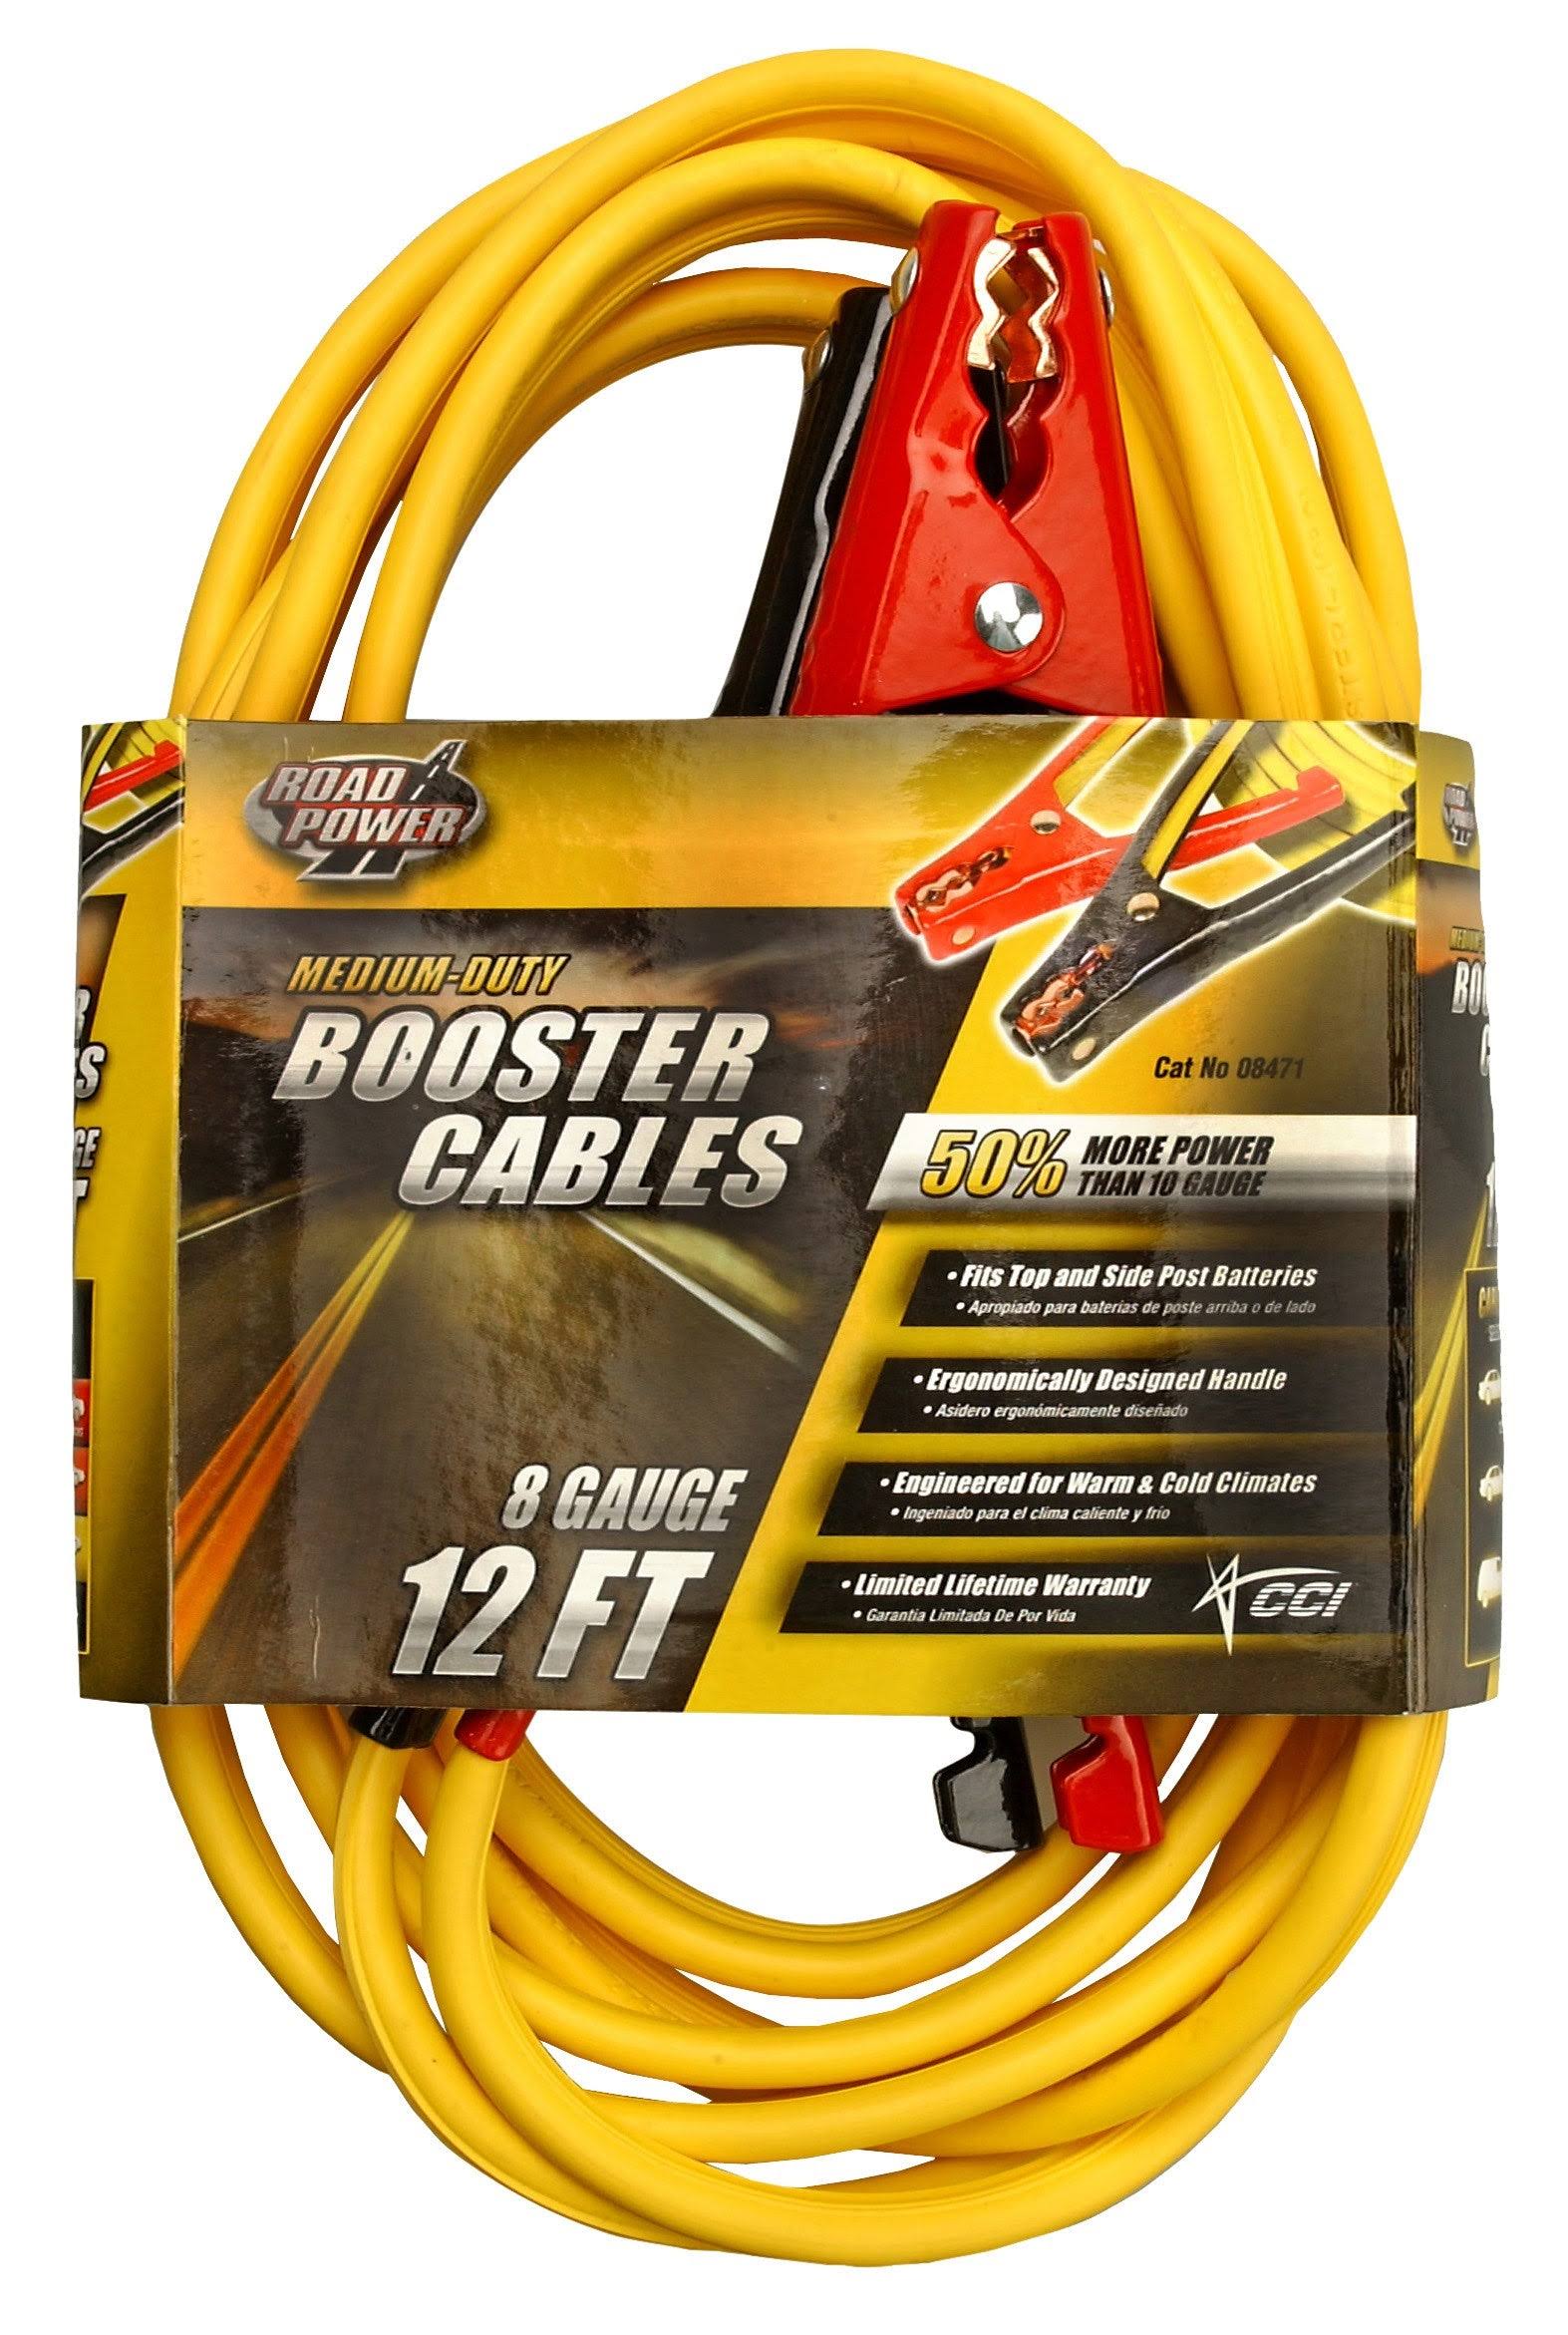 Coleman Cable Medium-duty Booster Cables - 12'